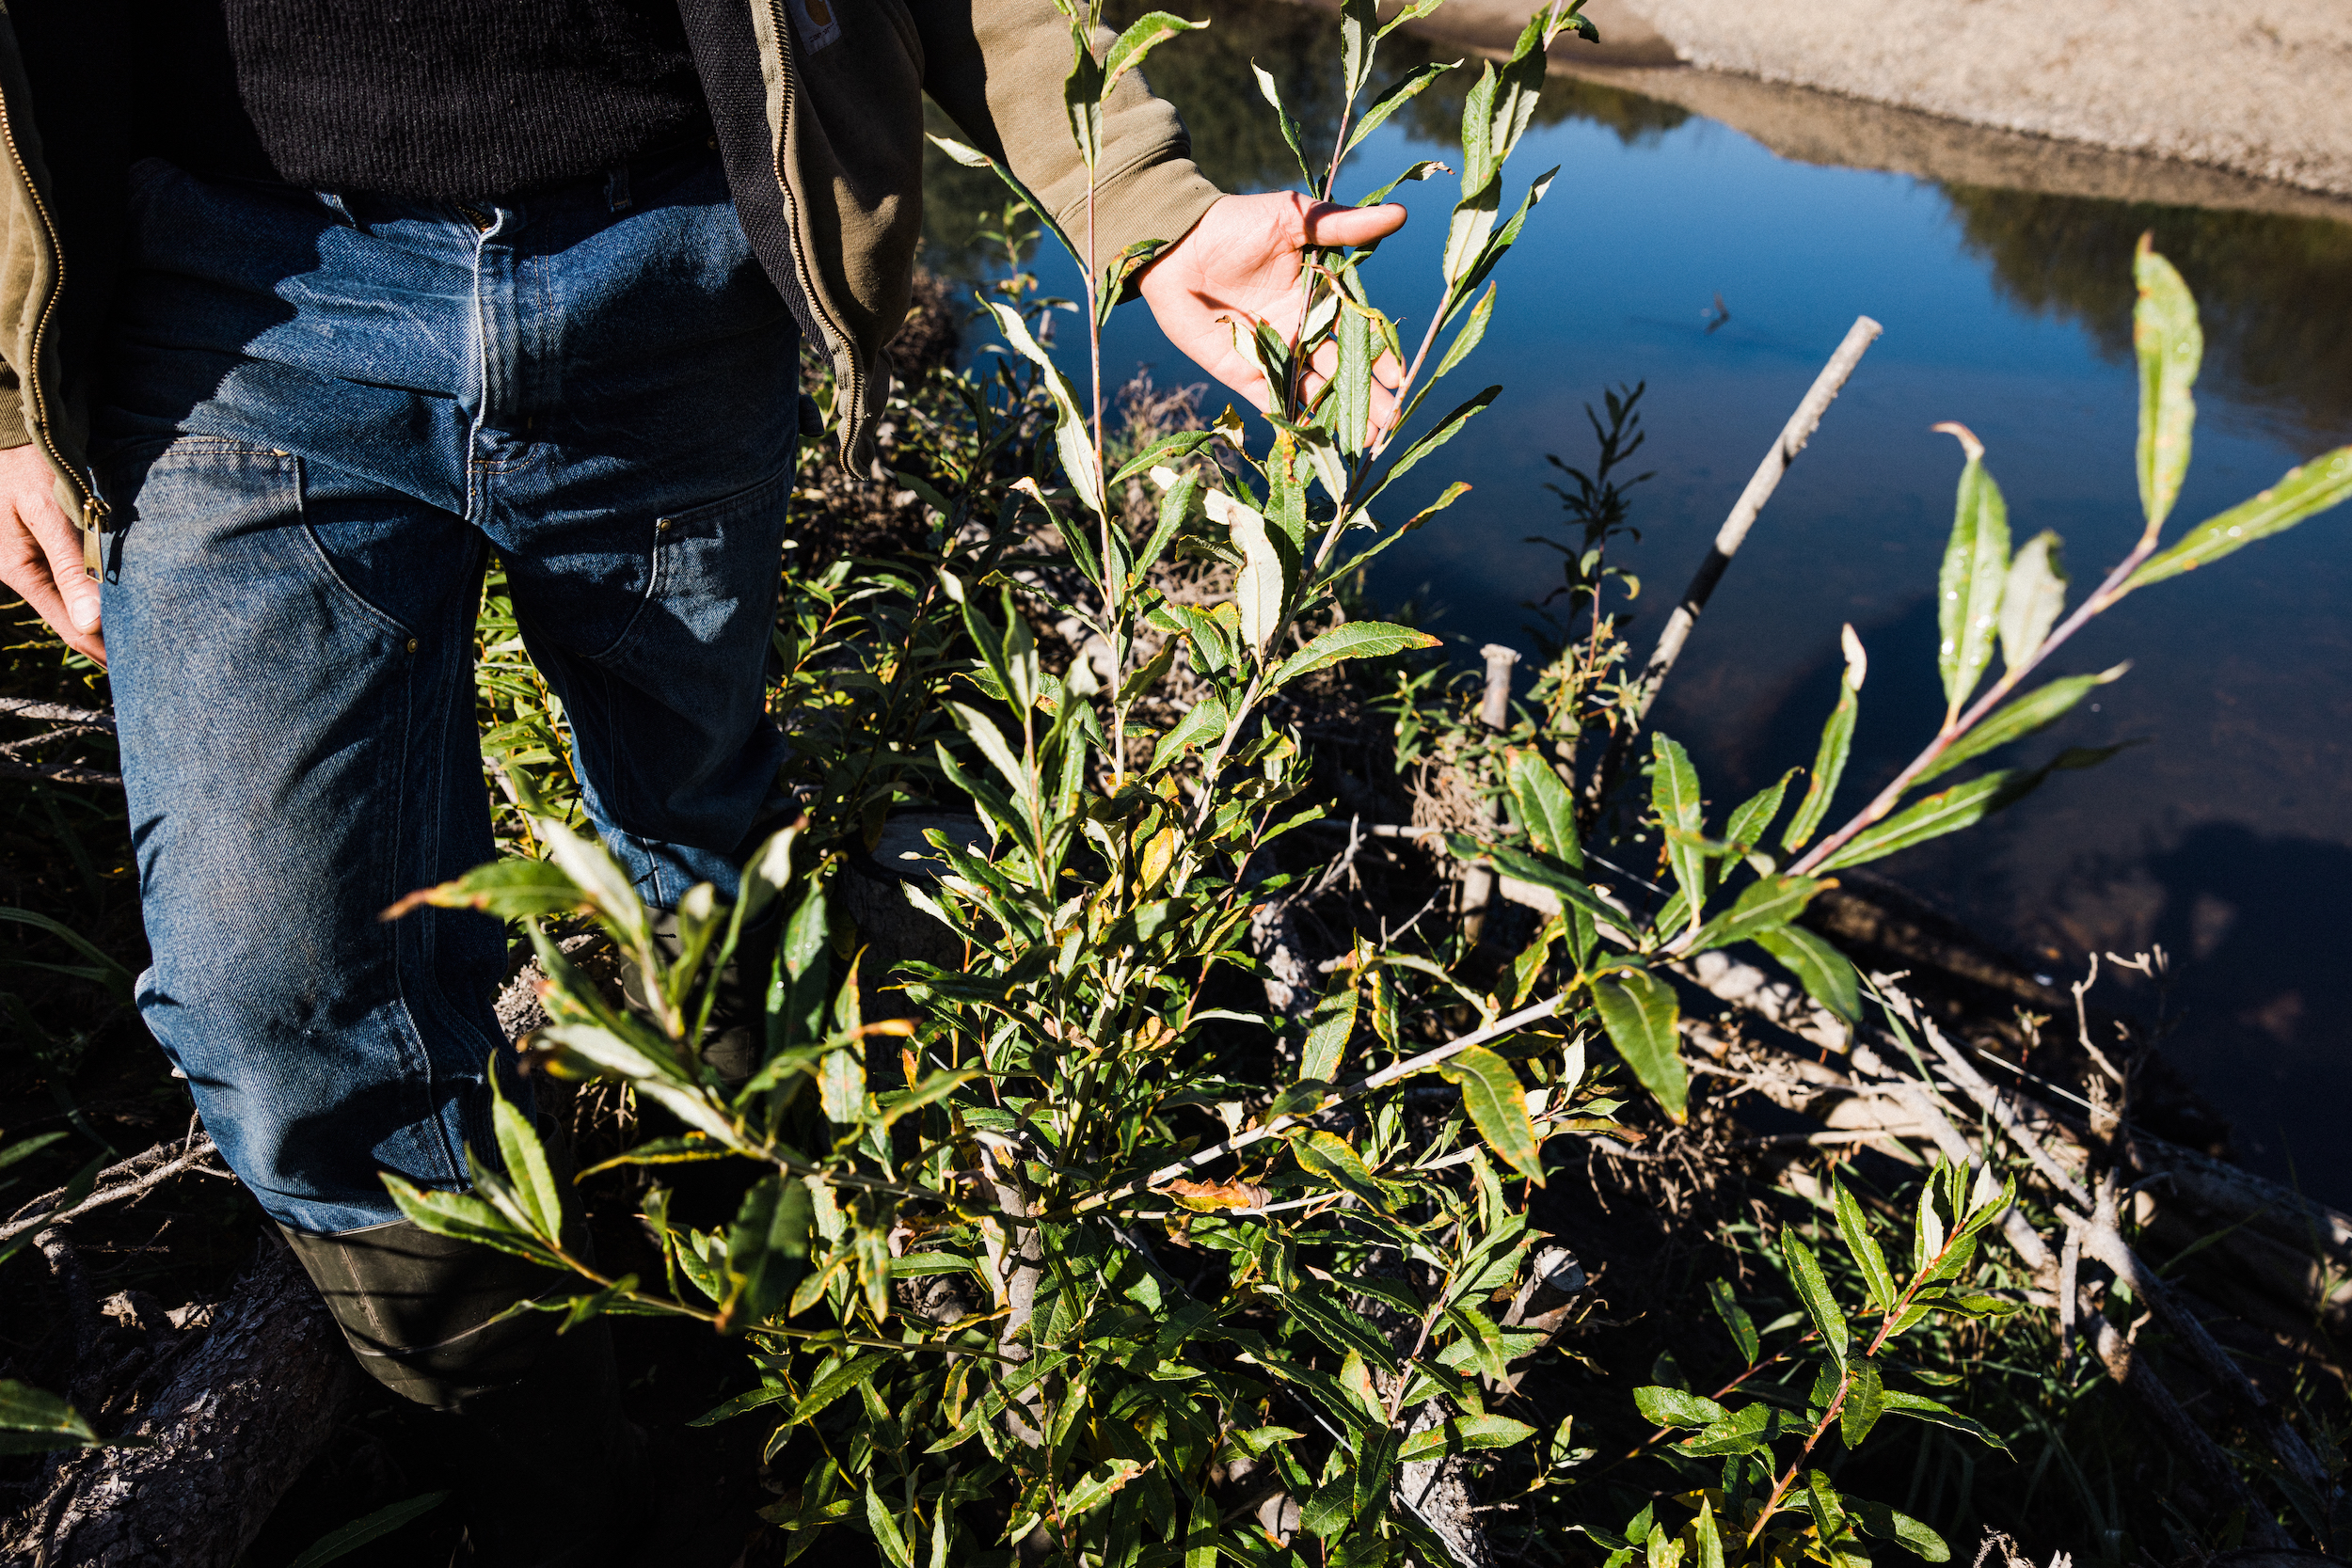 Willow shoots planted throughout a bank of the Upper Bulkley River will develop root networks that will hold the riverbank together, preventing further erosion during flood events.